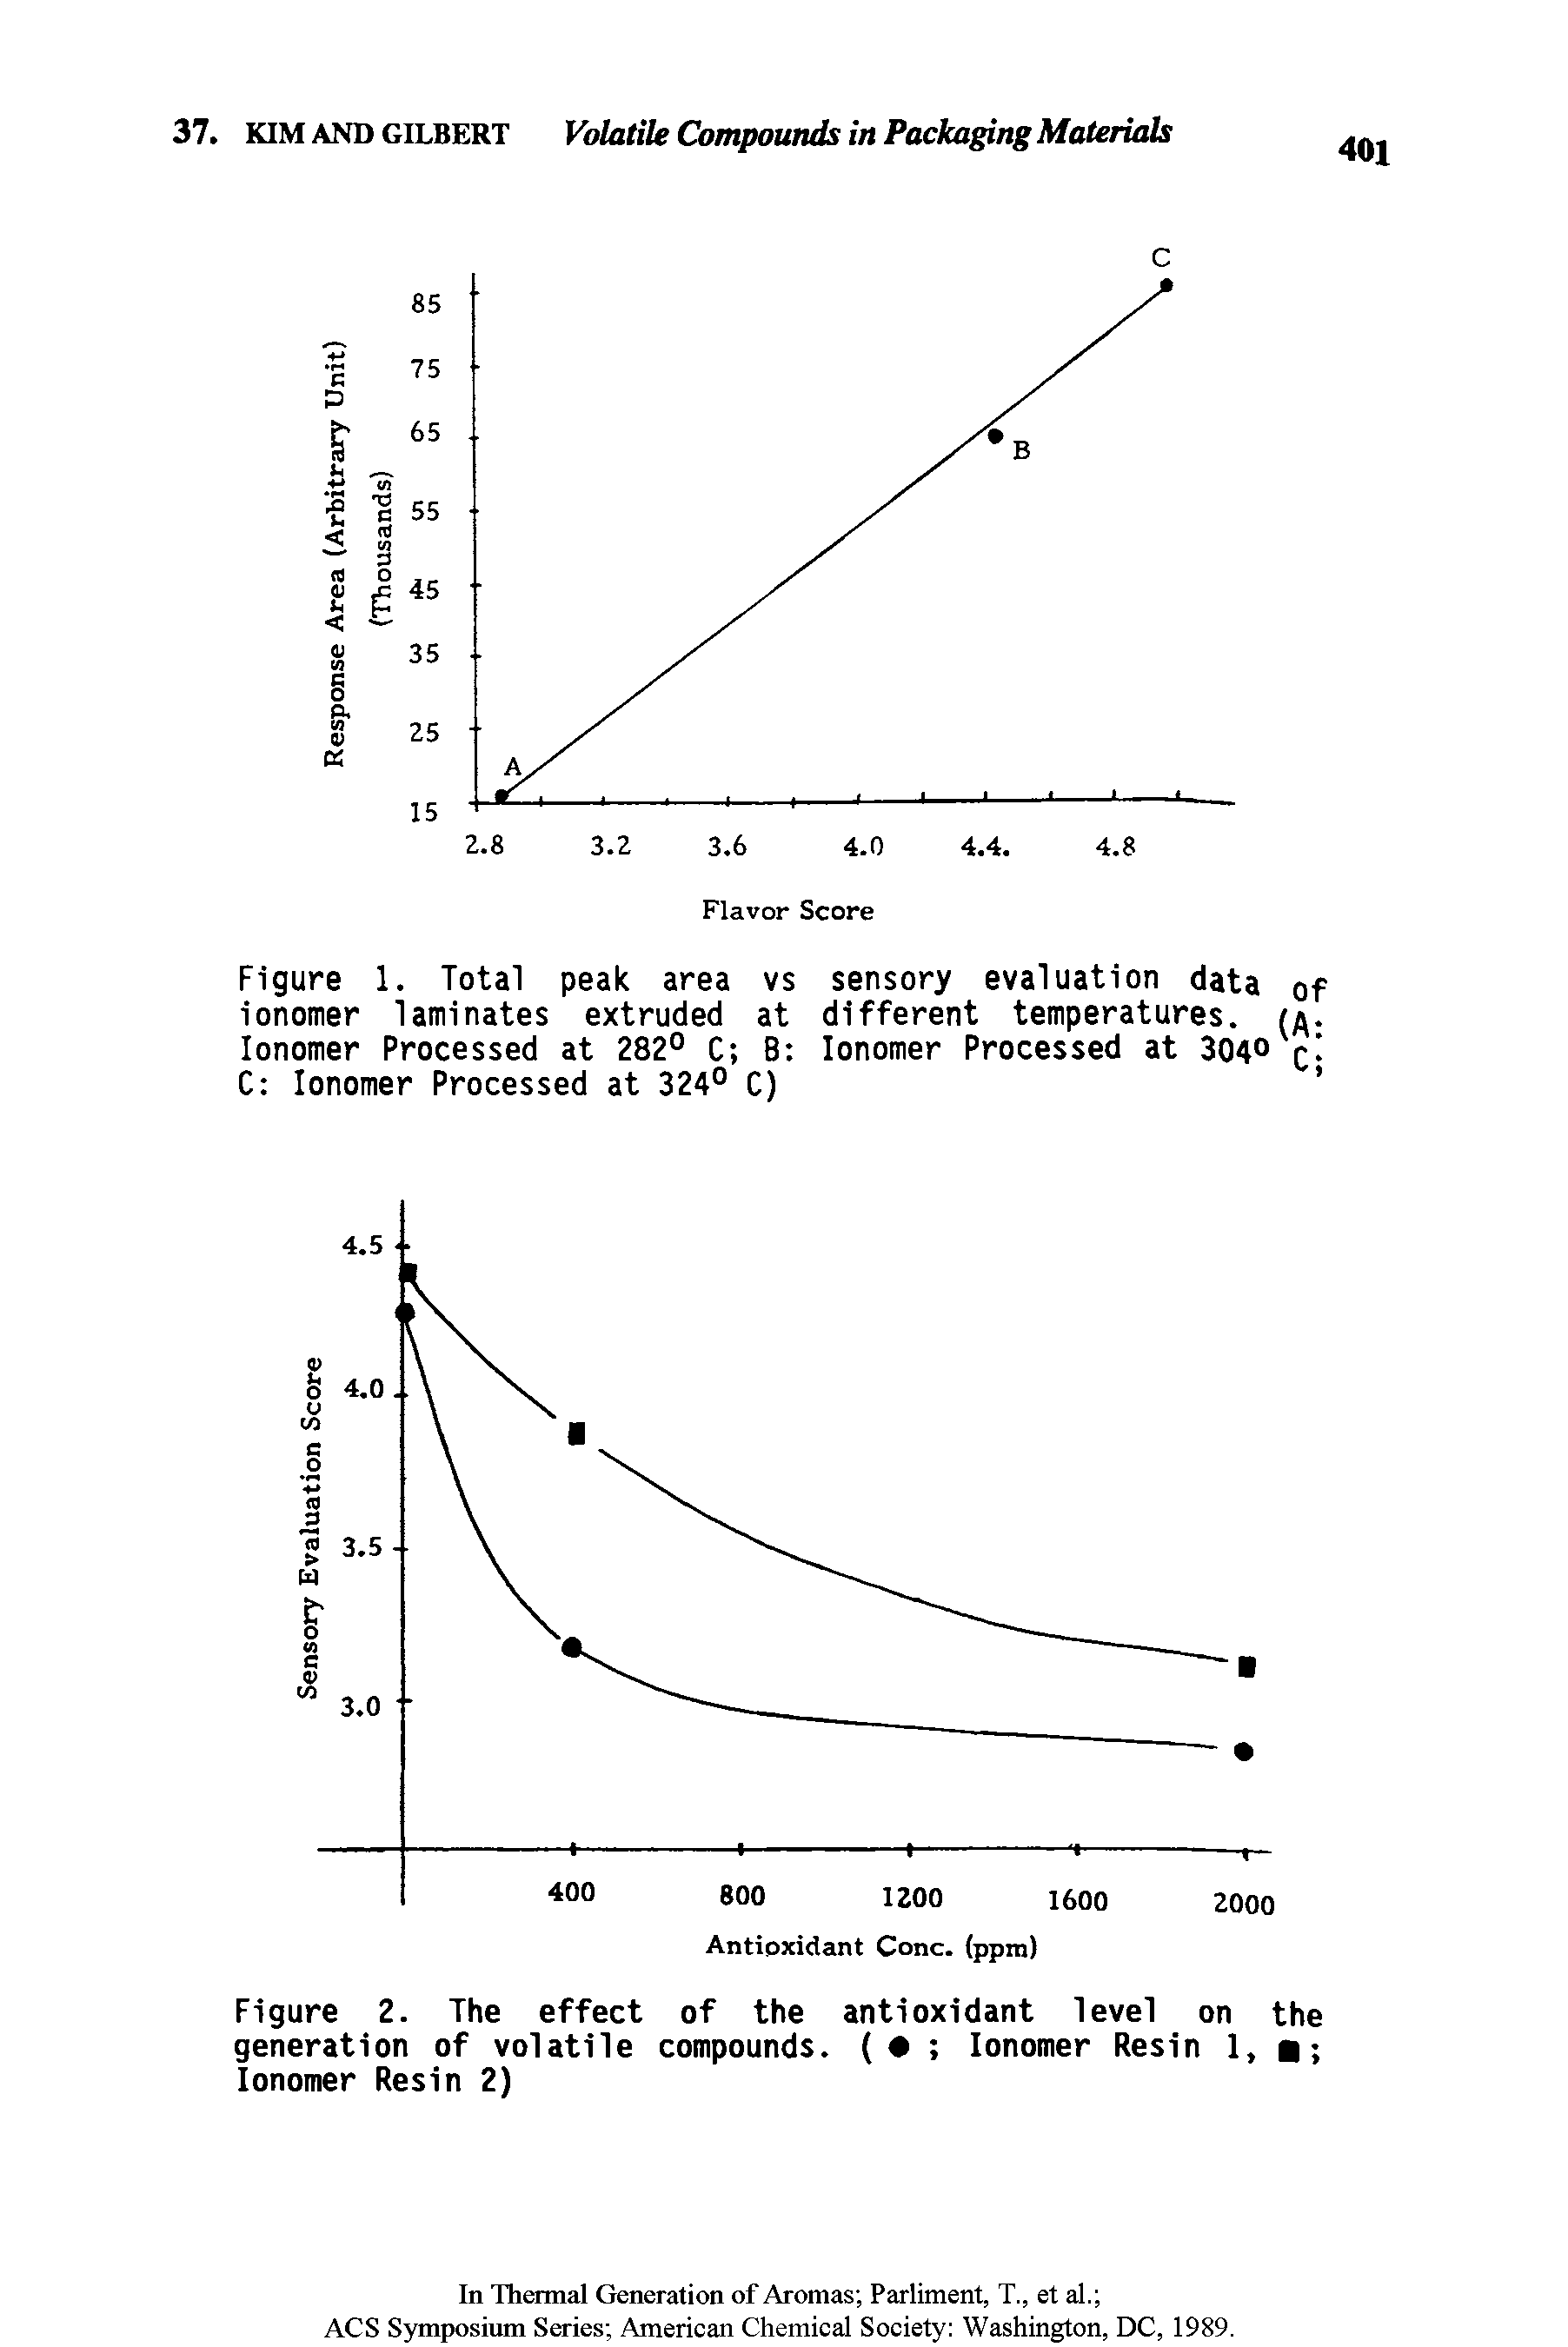 Figure 2. The effect of the antioxidant level on the generation of volatile compounds. ( Ionomer Resin 1, Ionomer Resin 2)...